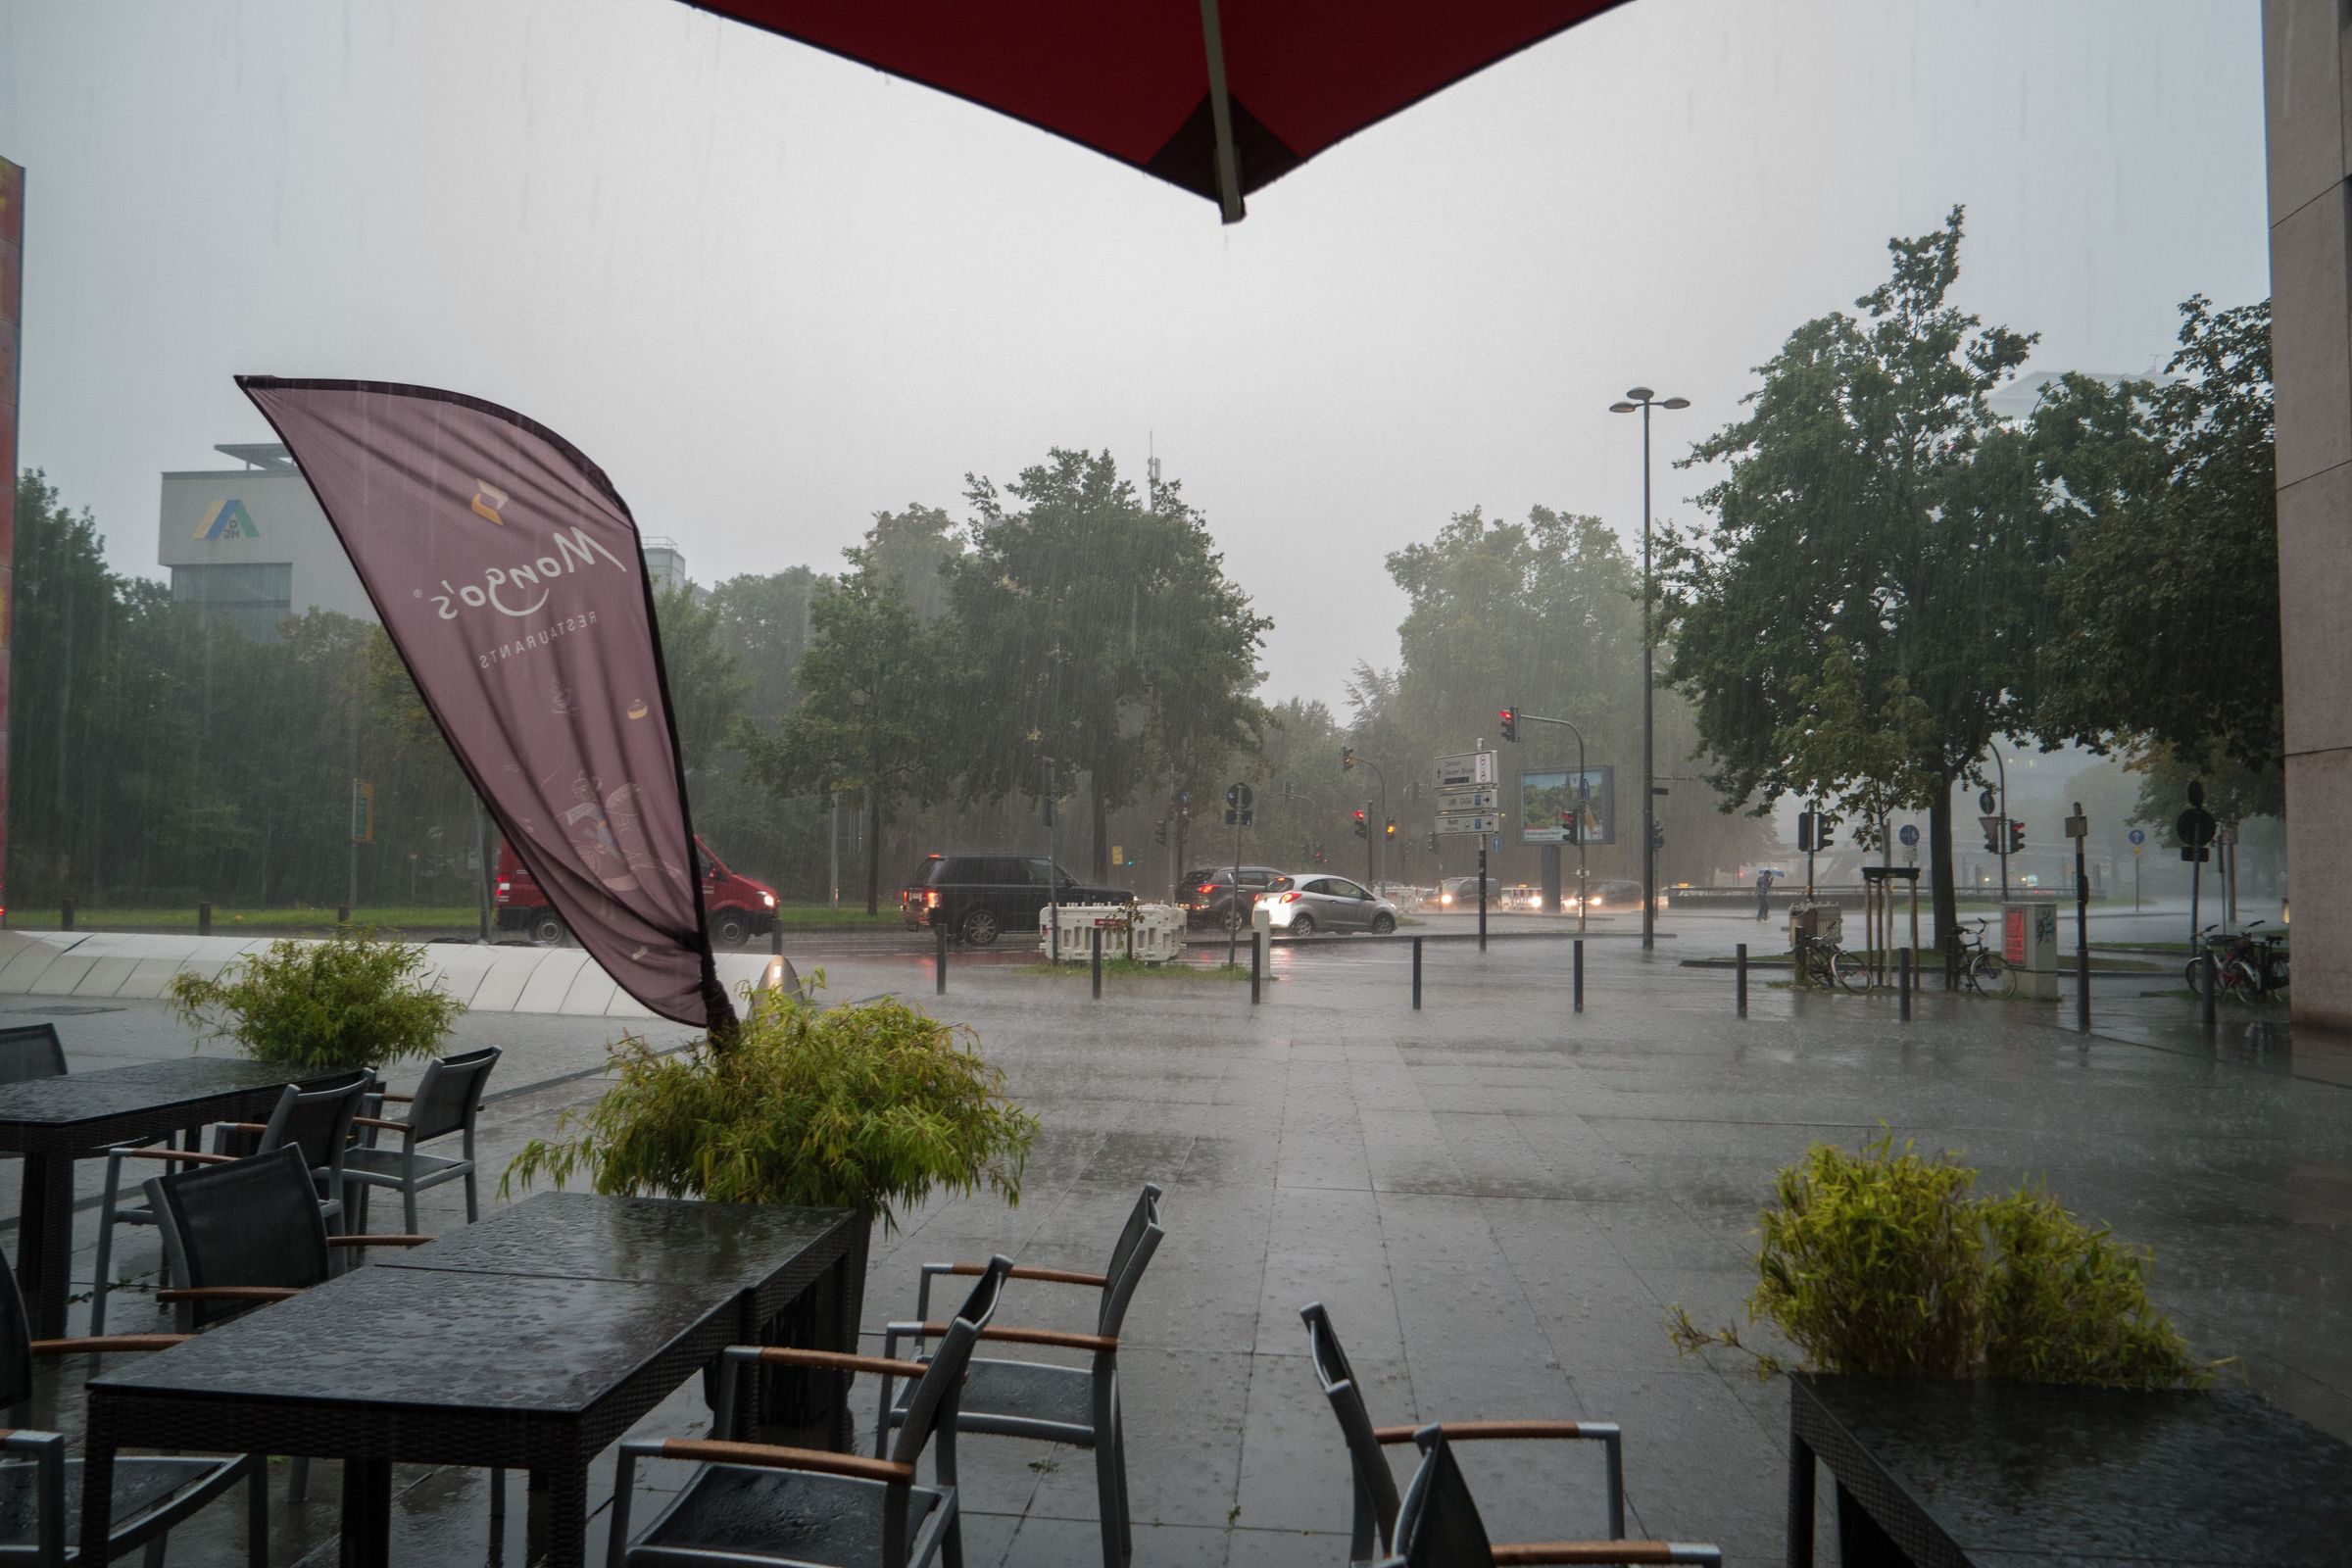 Heavy rainfall left us searching for cover under umbrellas of Mongo's Restaurant after being kicked out of the Köln Triangle lobby.